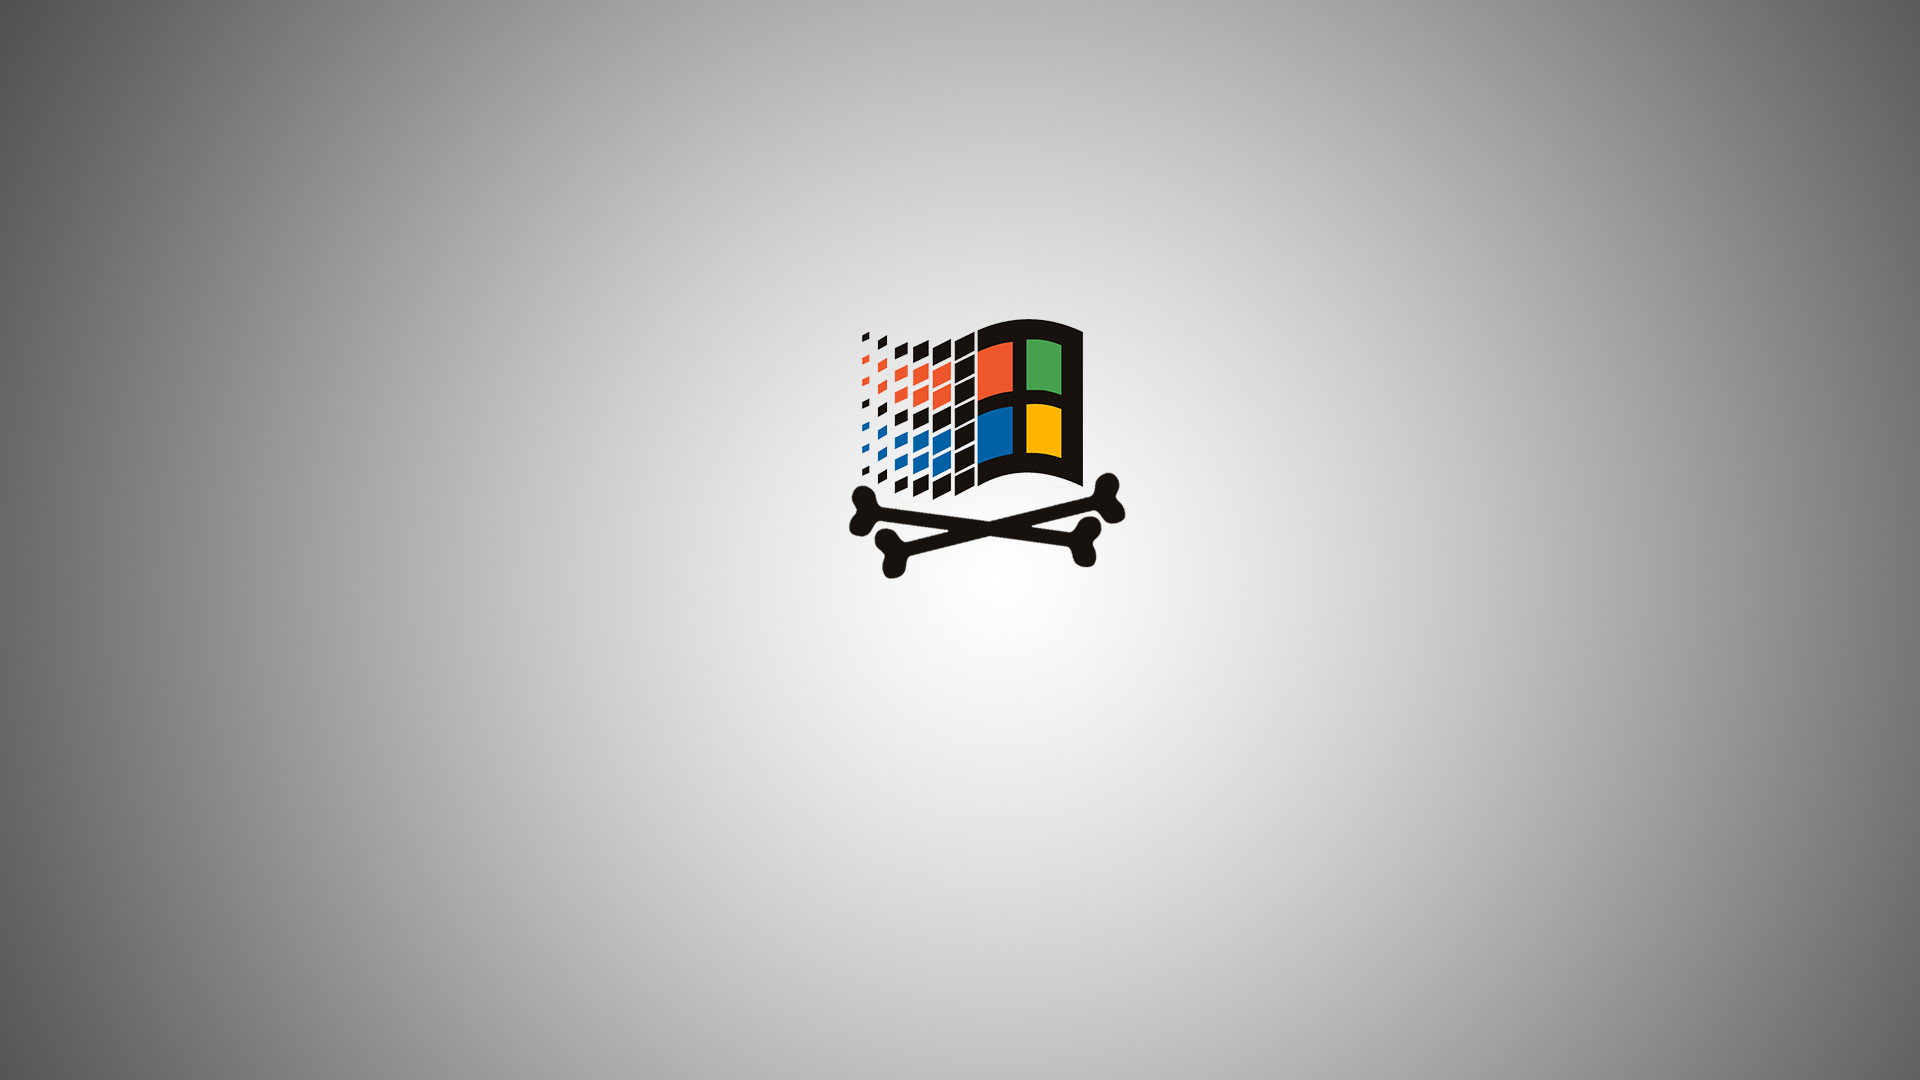 A computer screen with the windows logo on it - Windows 95